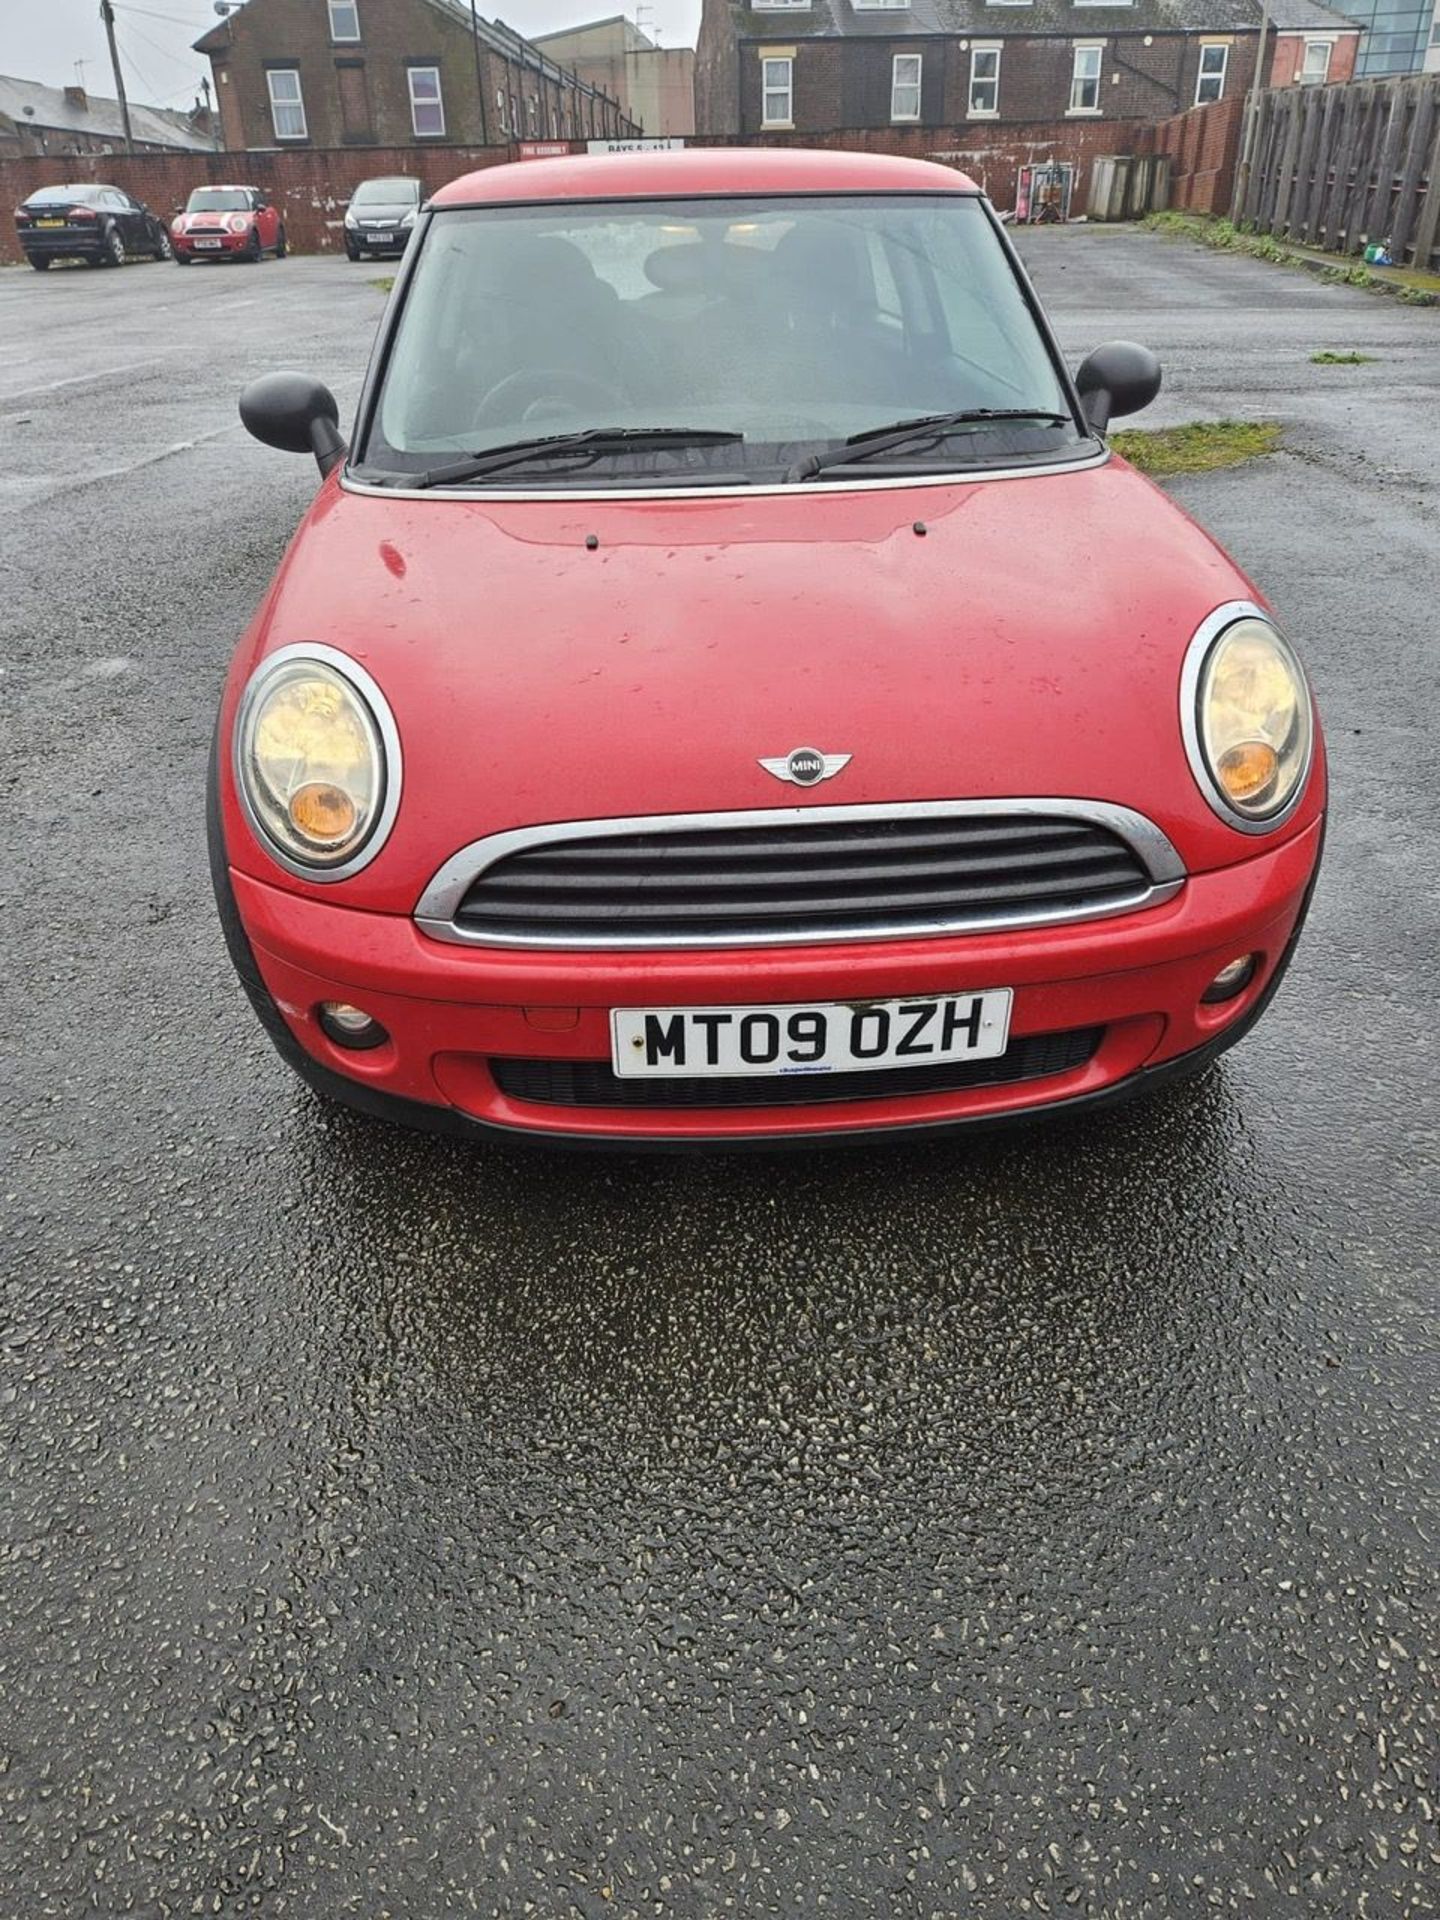 MT09 OZH MINI ONE HATCHBACK - 1.4 One 3dr Engine Size:1400 First Registered:17/07/2009 - Image 3 of 8